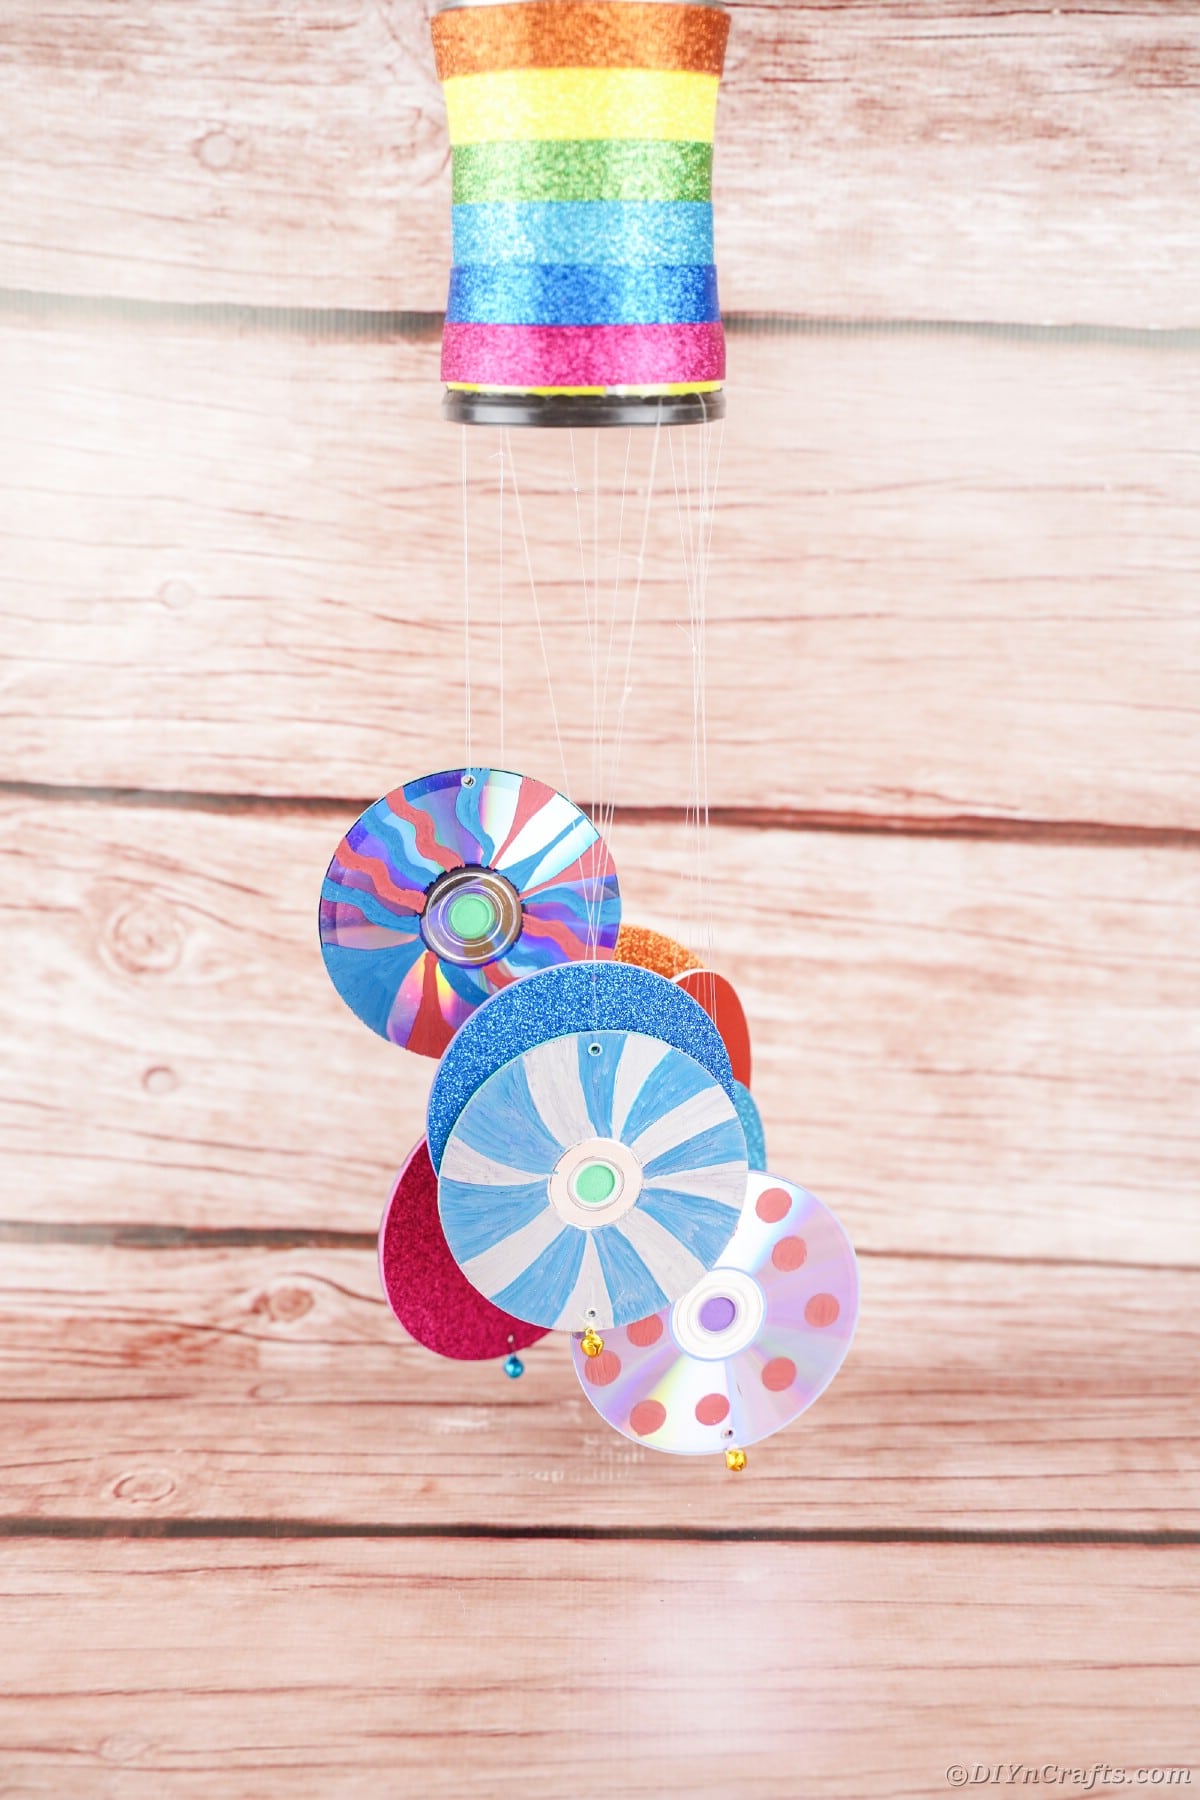 Wind chime hanging by wooden wall